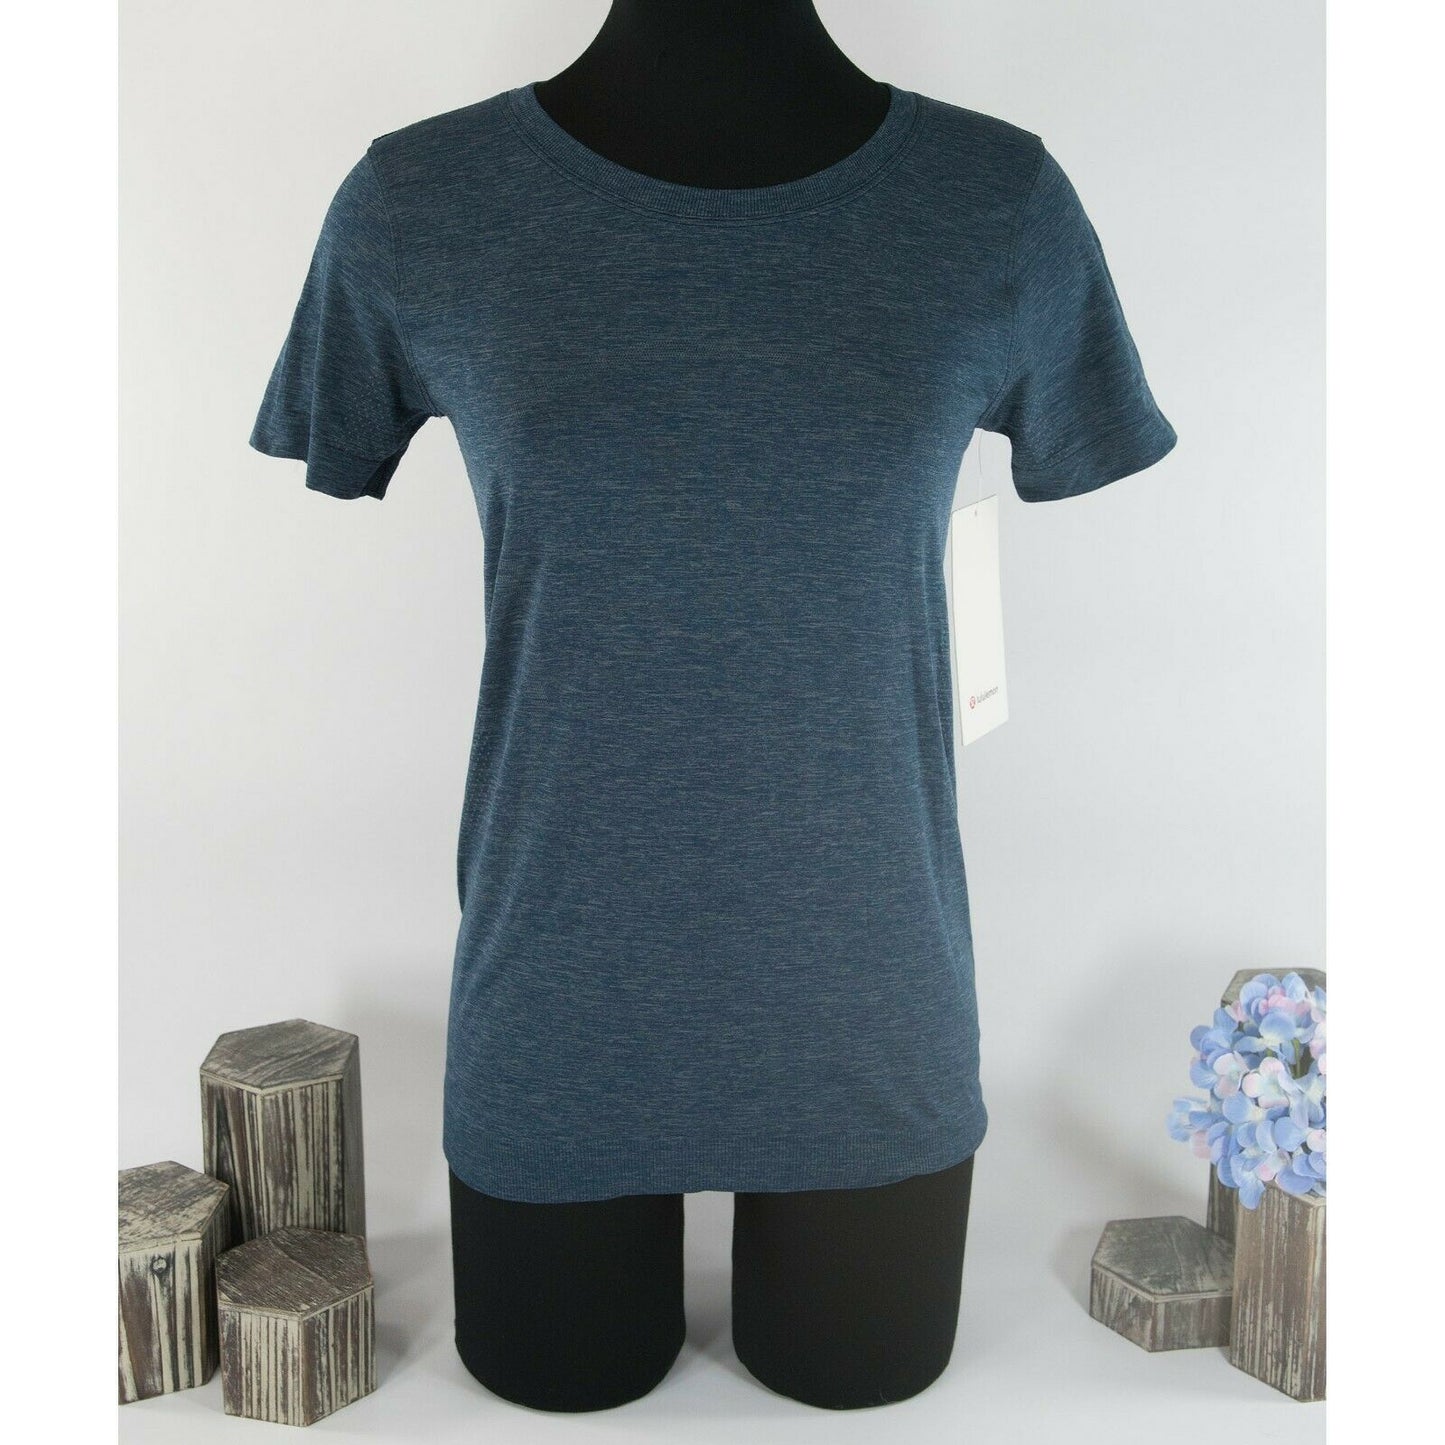 Lululemon Blue Swiftly Relaxed Athletica Knit Short Sleeve T-Shirt Top Sz 4 NWT